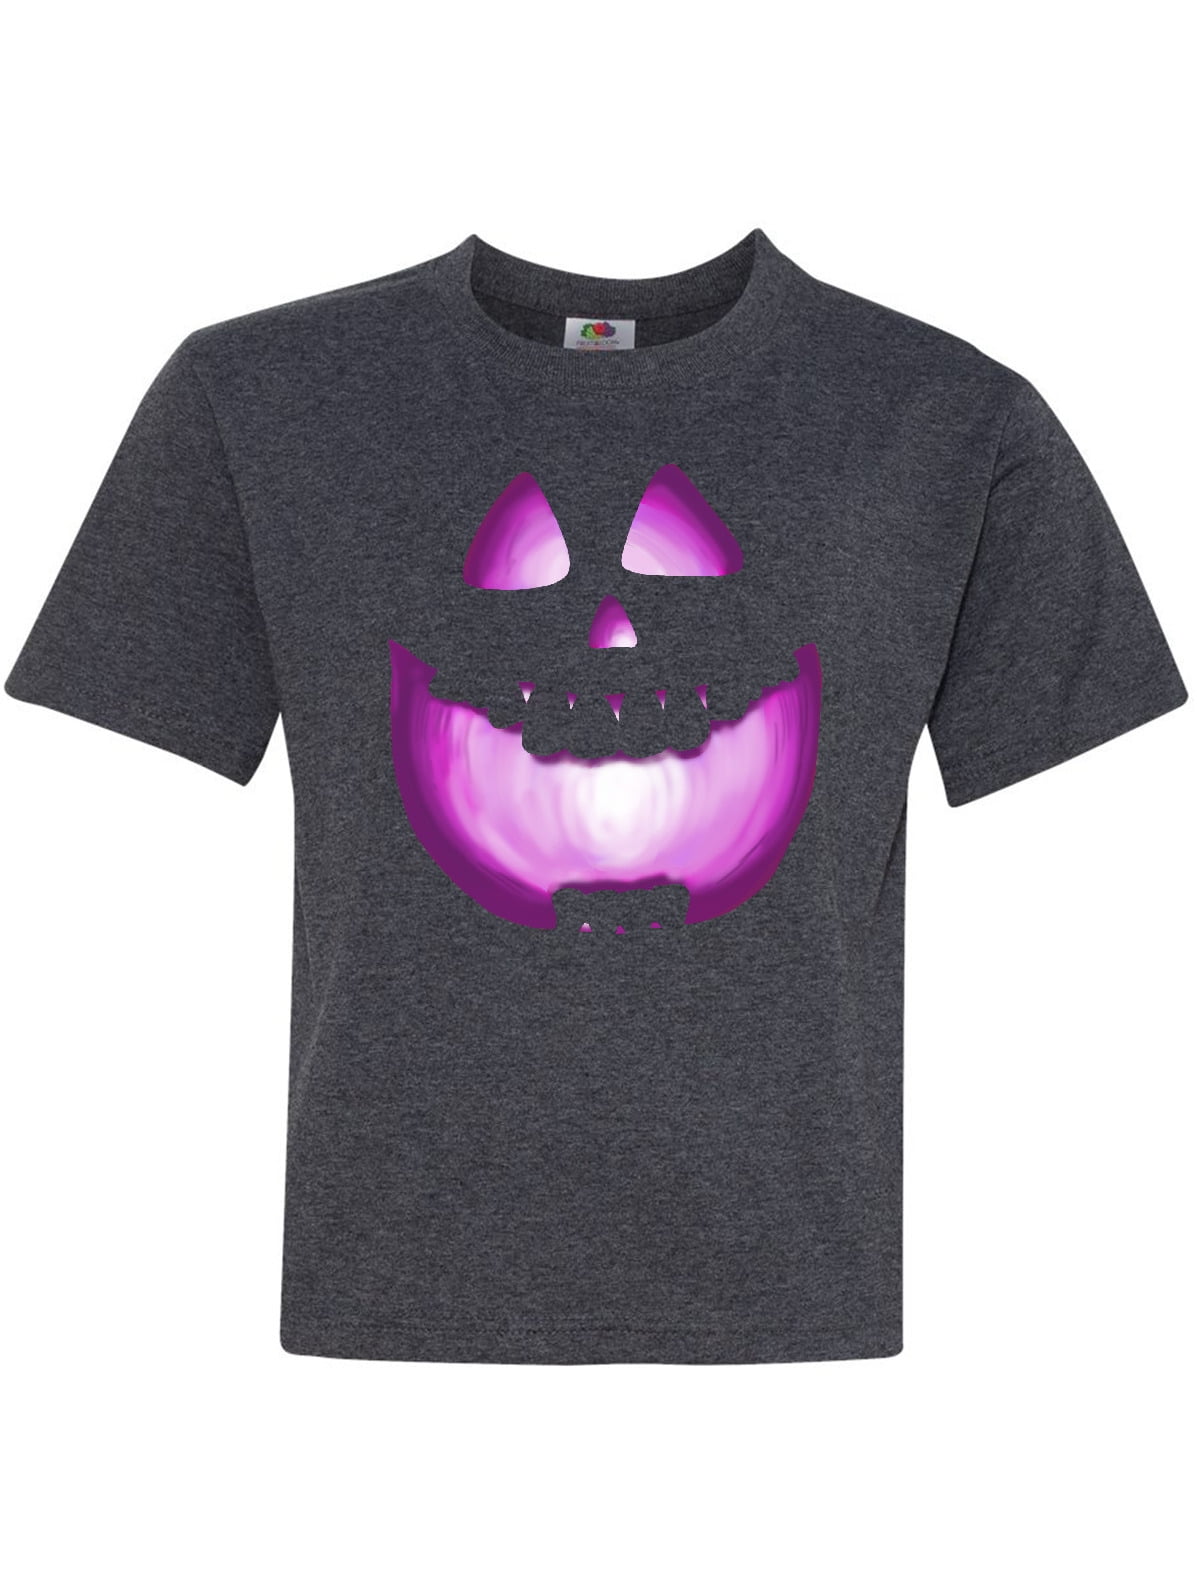 Details about   Scary Pumpkin Halloween Graphic Tee Glows NWT 